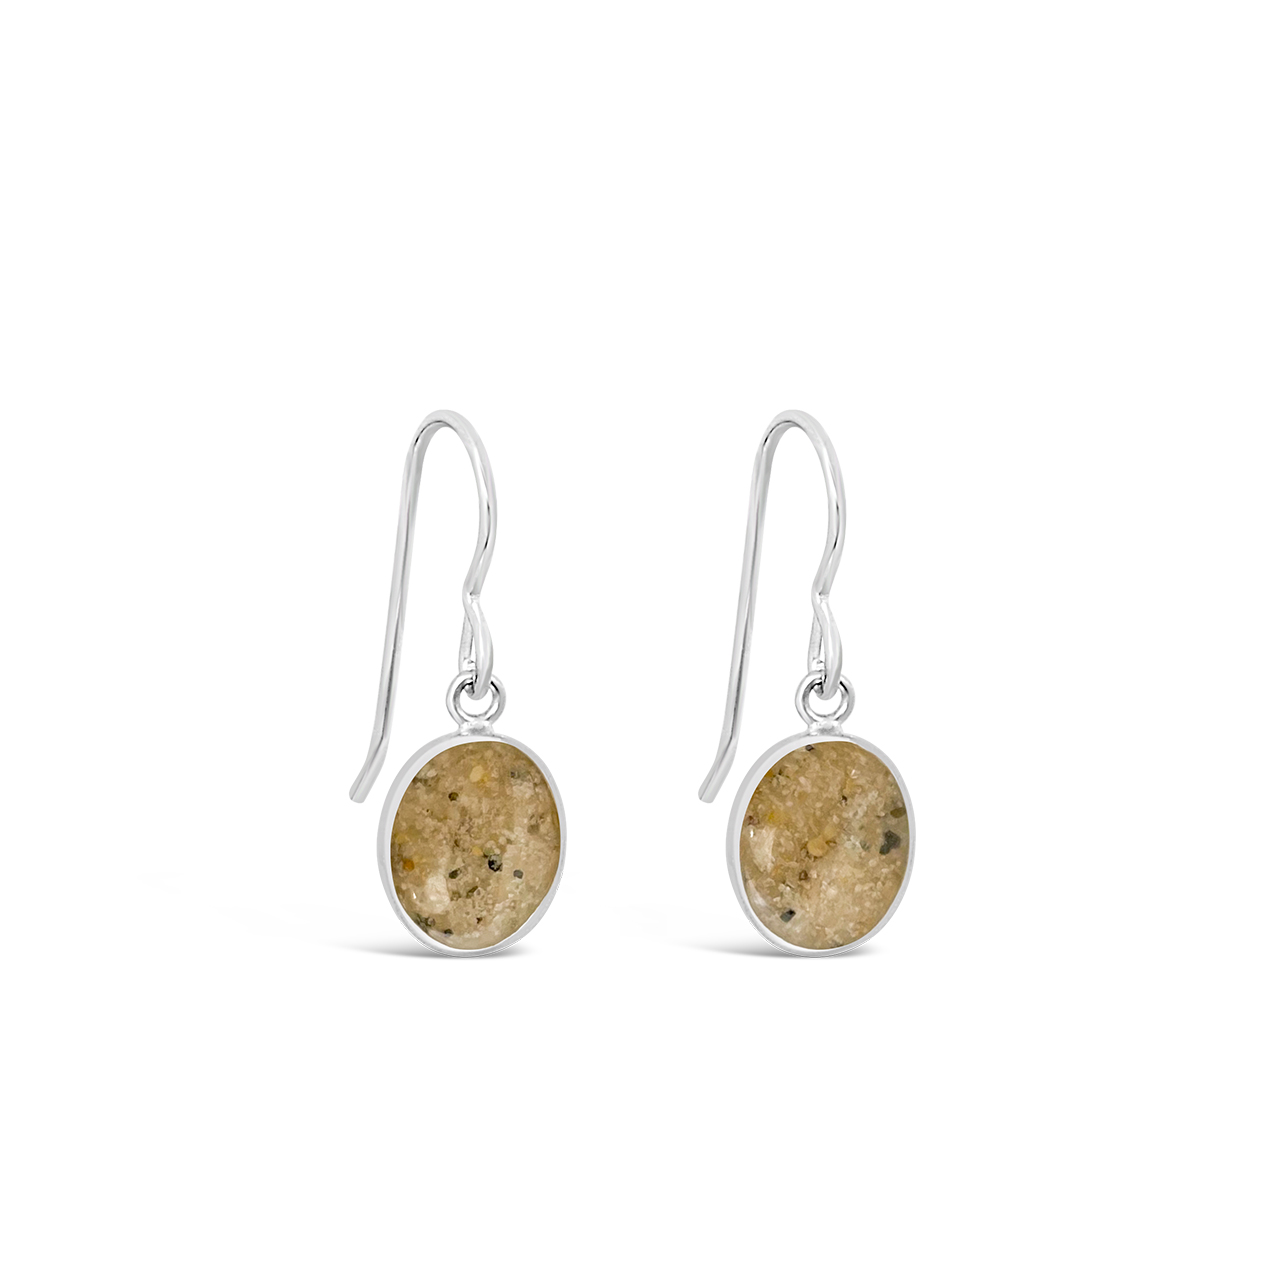 Image of Sandrop Earrings - Small